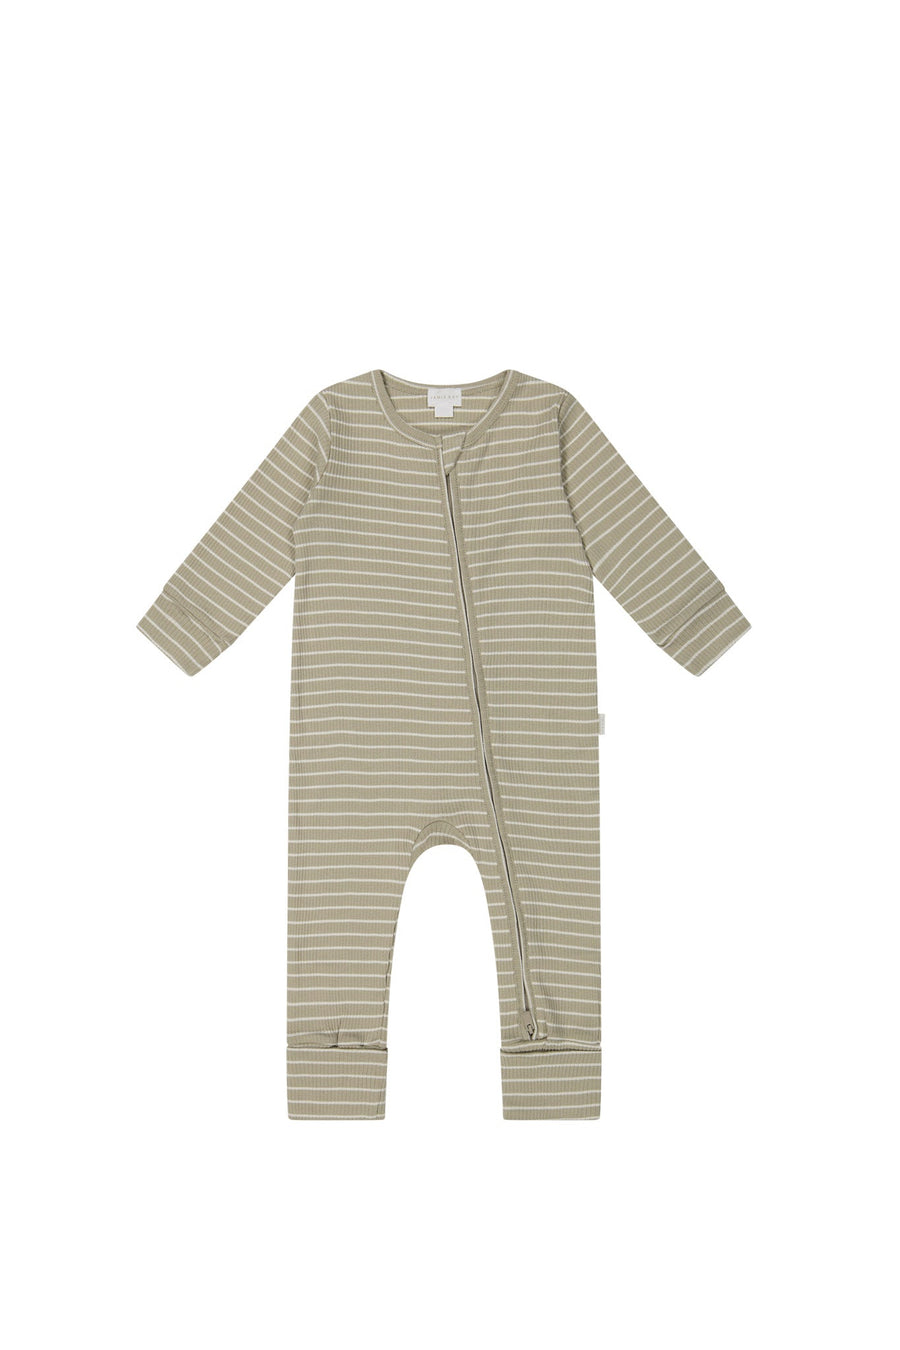 Organic Cotton Modal Gracelyn Onepiece - Cashew/Cloud Stripe Childrens Onepiece from Jamie Kay USA